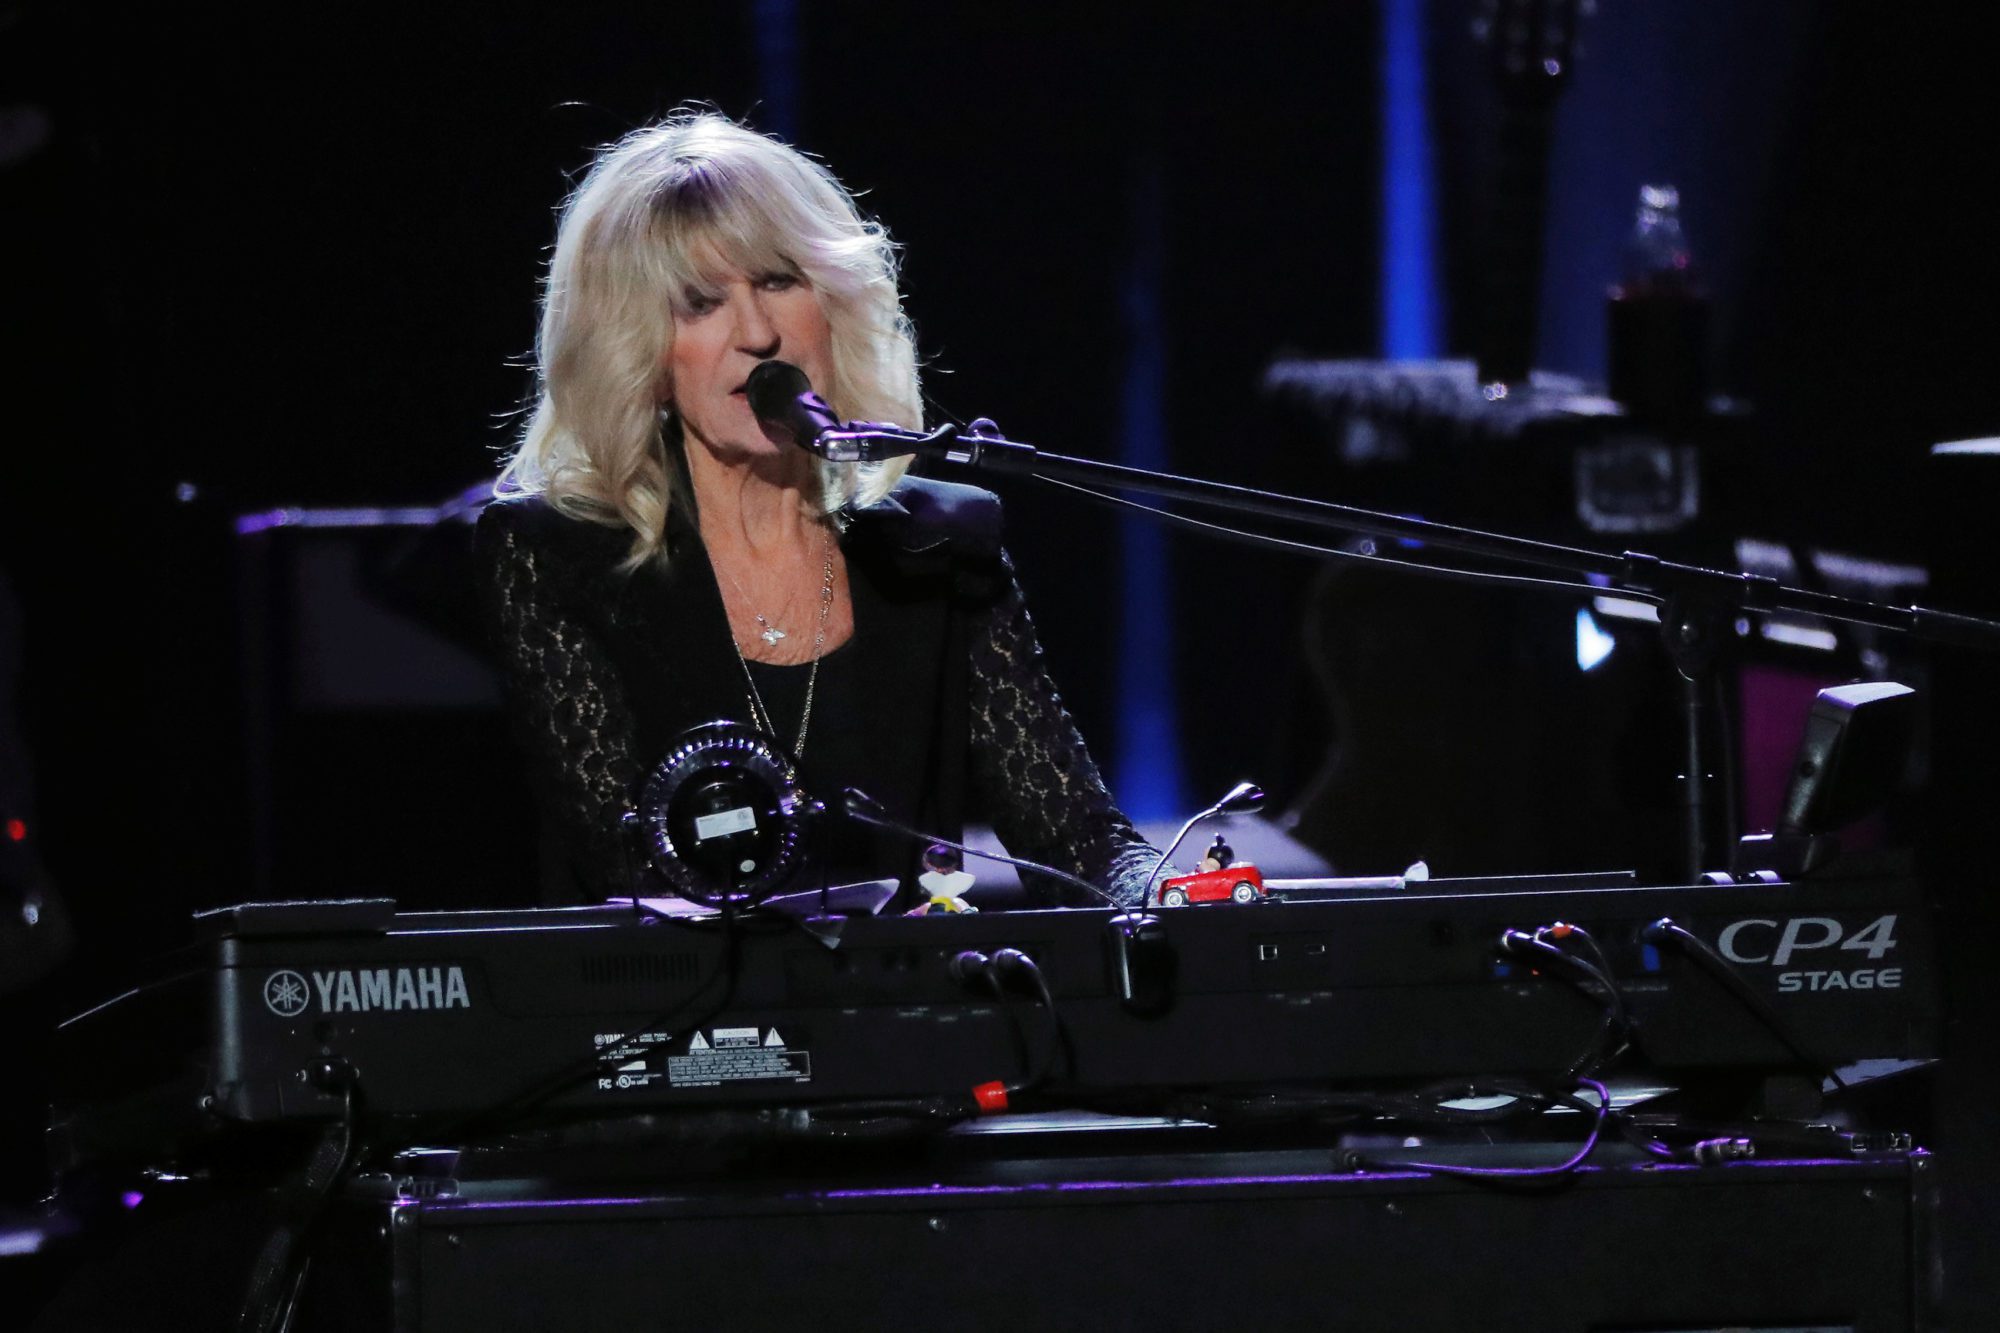 FILE PHOTO: Honoree Christine McVie of the group Fleetwood Mac performs during the 2018 MusiCares Person of the Year show honoring Fleetwood Mac at Radio City Music Hall in Manhattan, New York, U.S., January 26, 2018.  REUTERS/Andrew Kelly